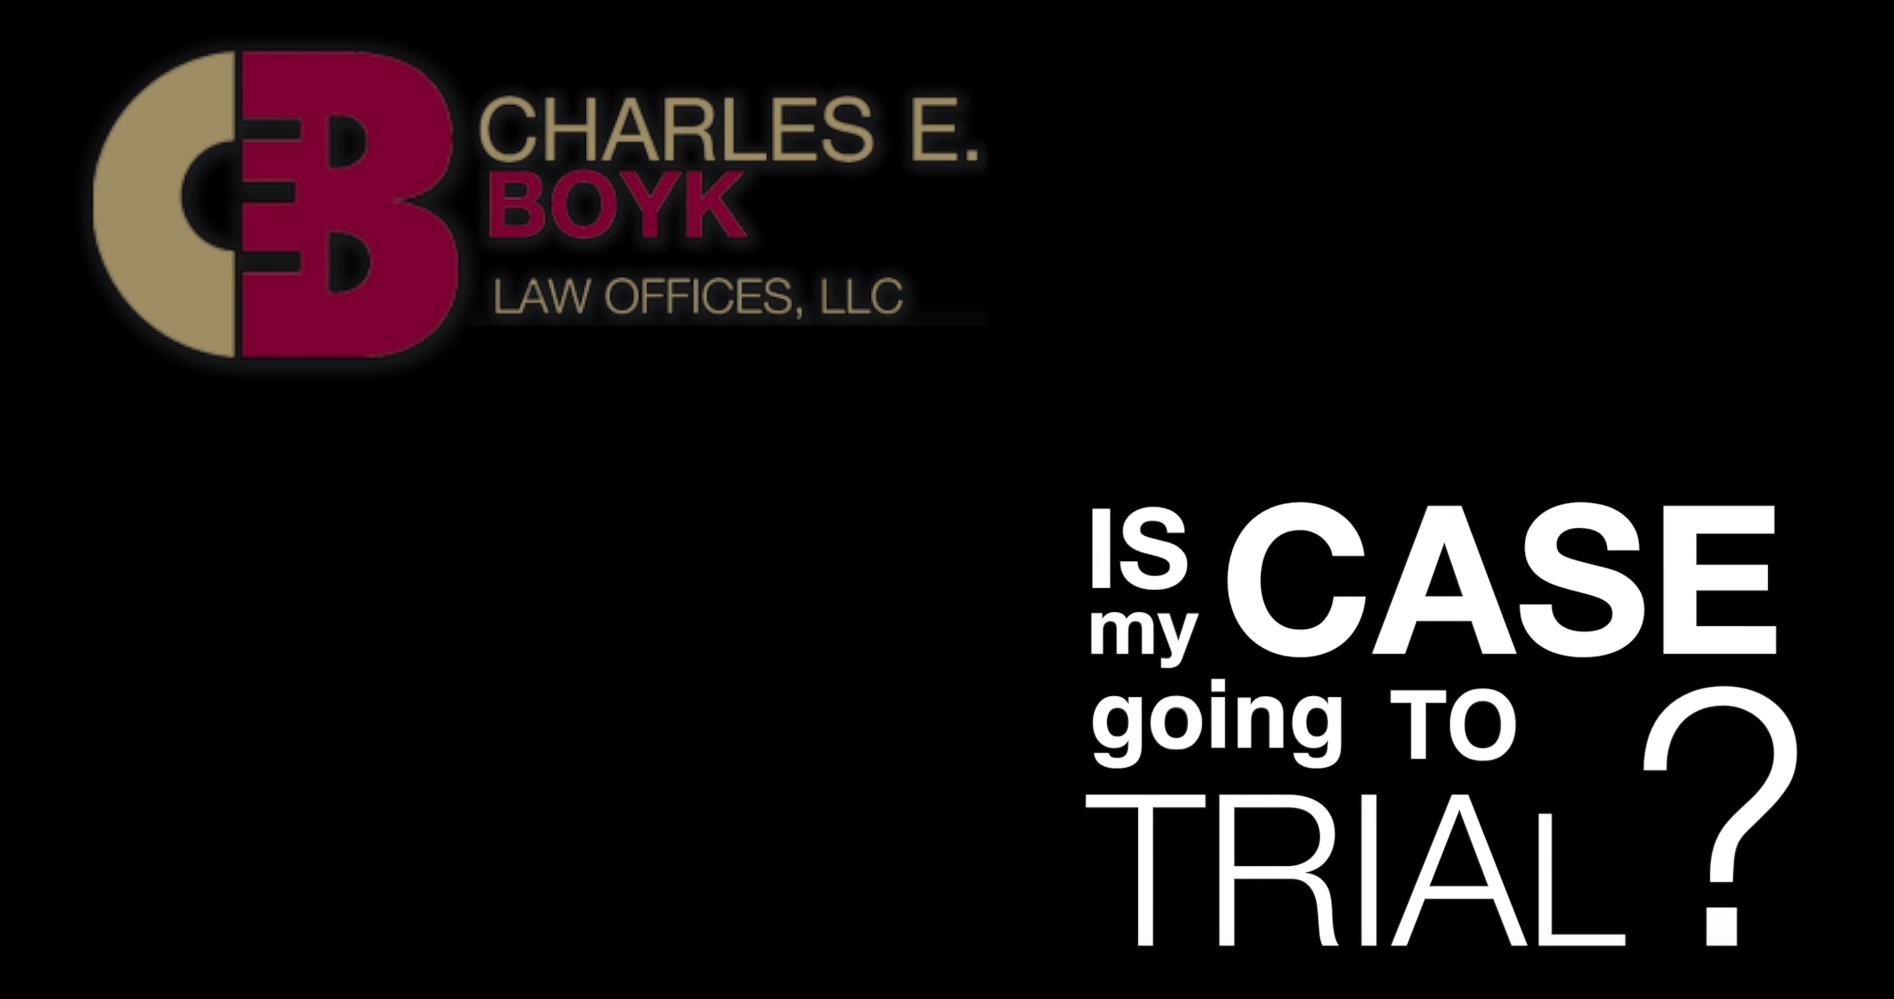 black banner with a sign that reads "Is my case going to trial?" and Charles Boyk's logo